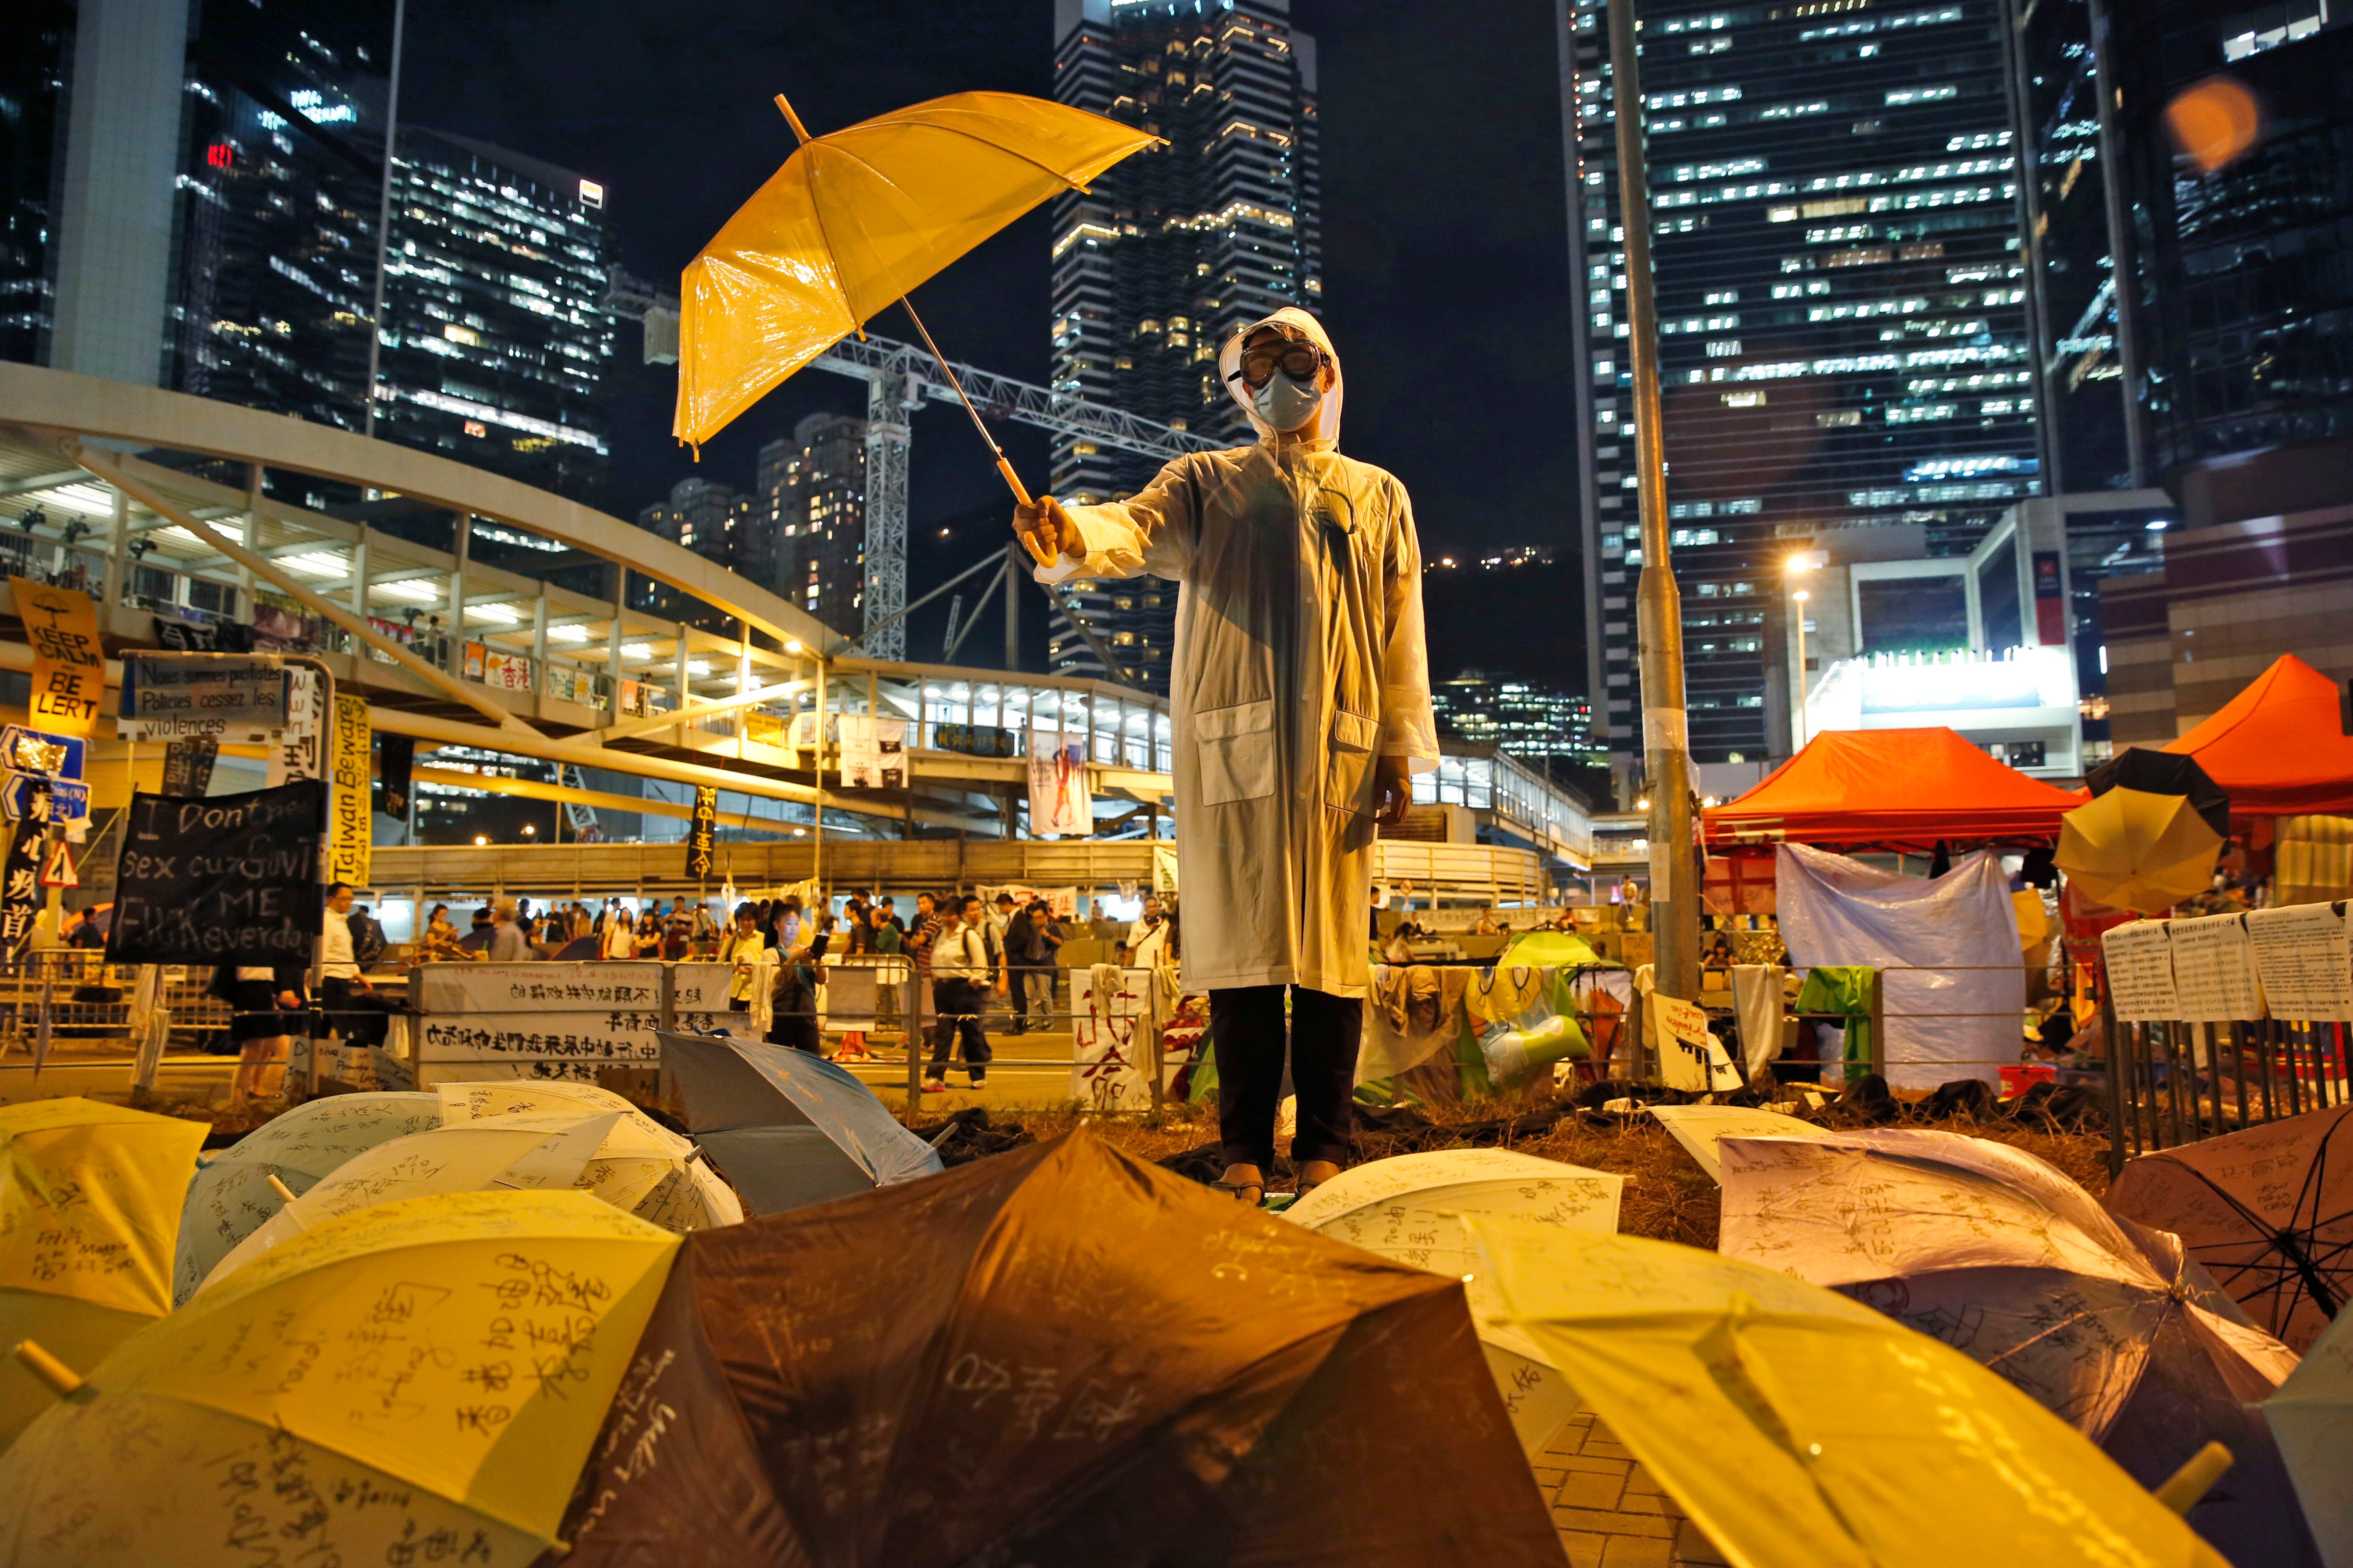 A protester holds an umbrella on a main road in the occupied areas outside government headquarters in Hong Kong's Admiralty on Oct. 9, 2014. (Kin Cheung—AP)